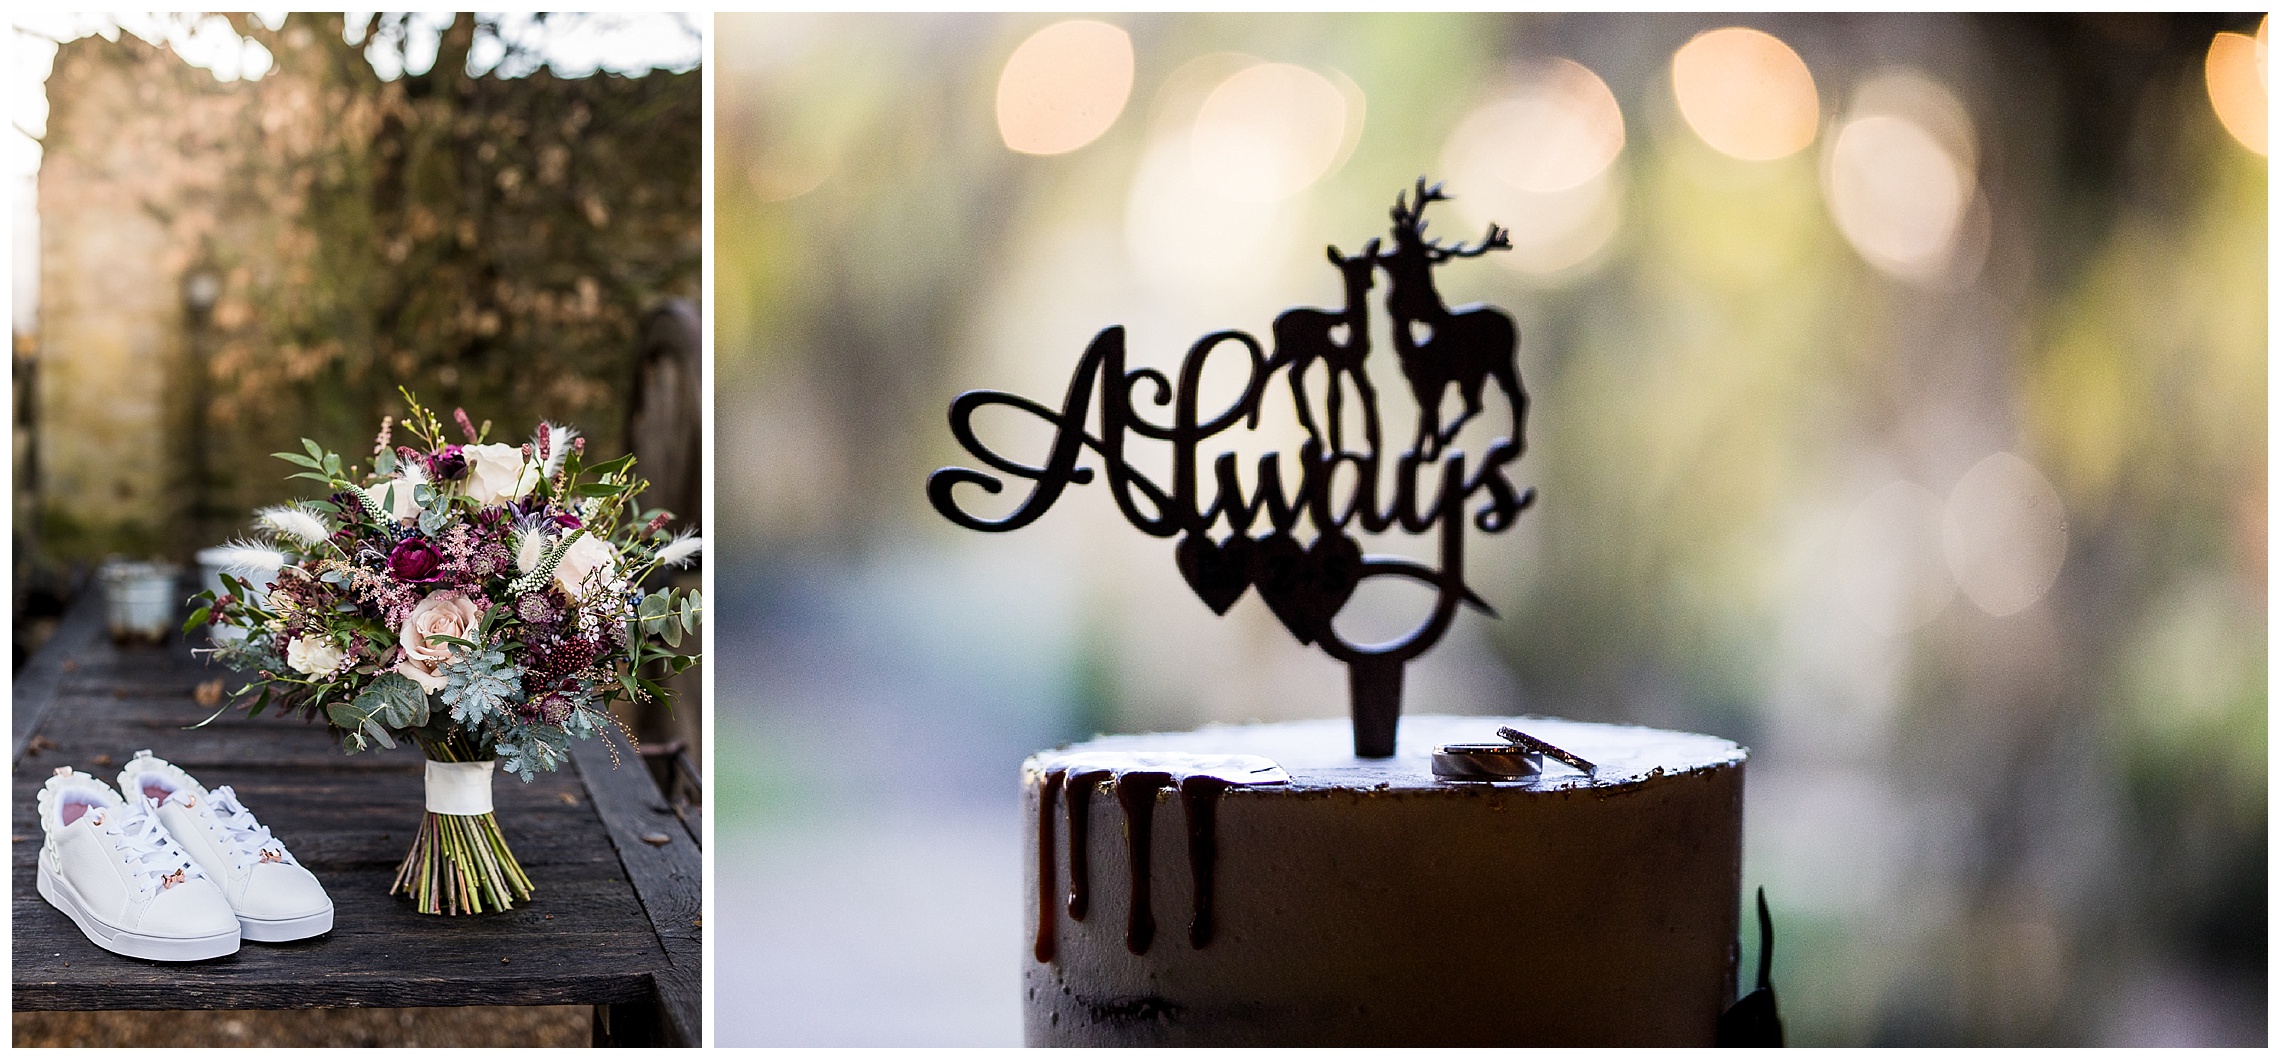 Harry potter tiered wedding cake with 'always' sign